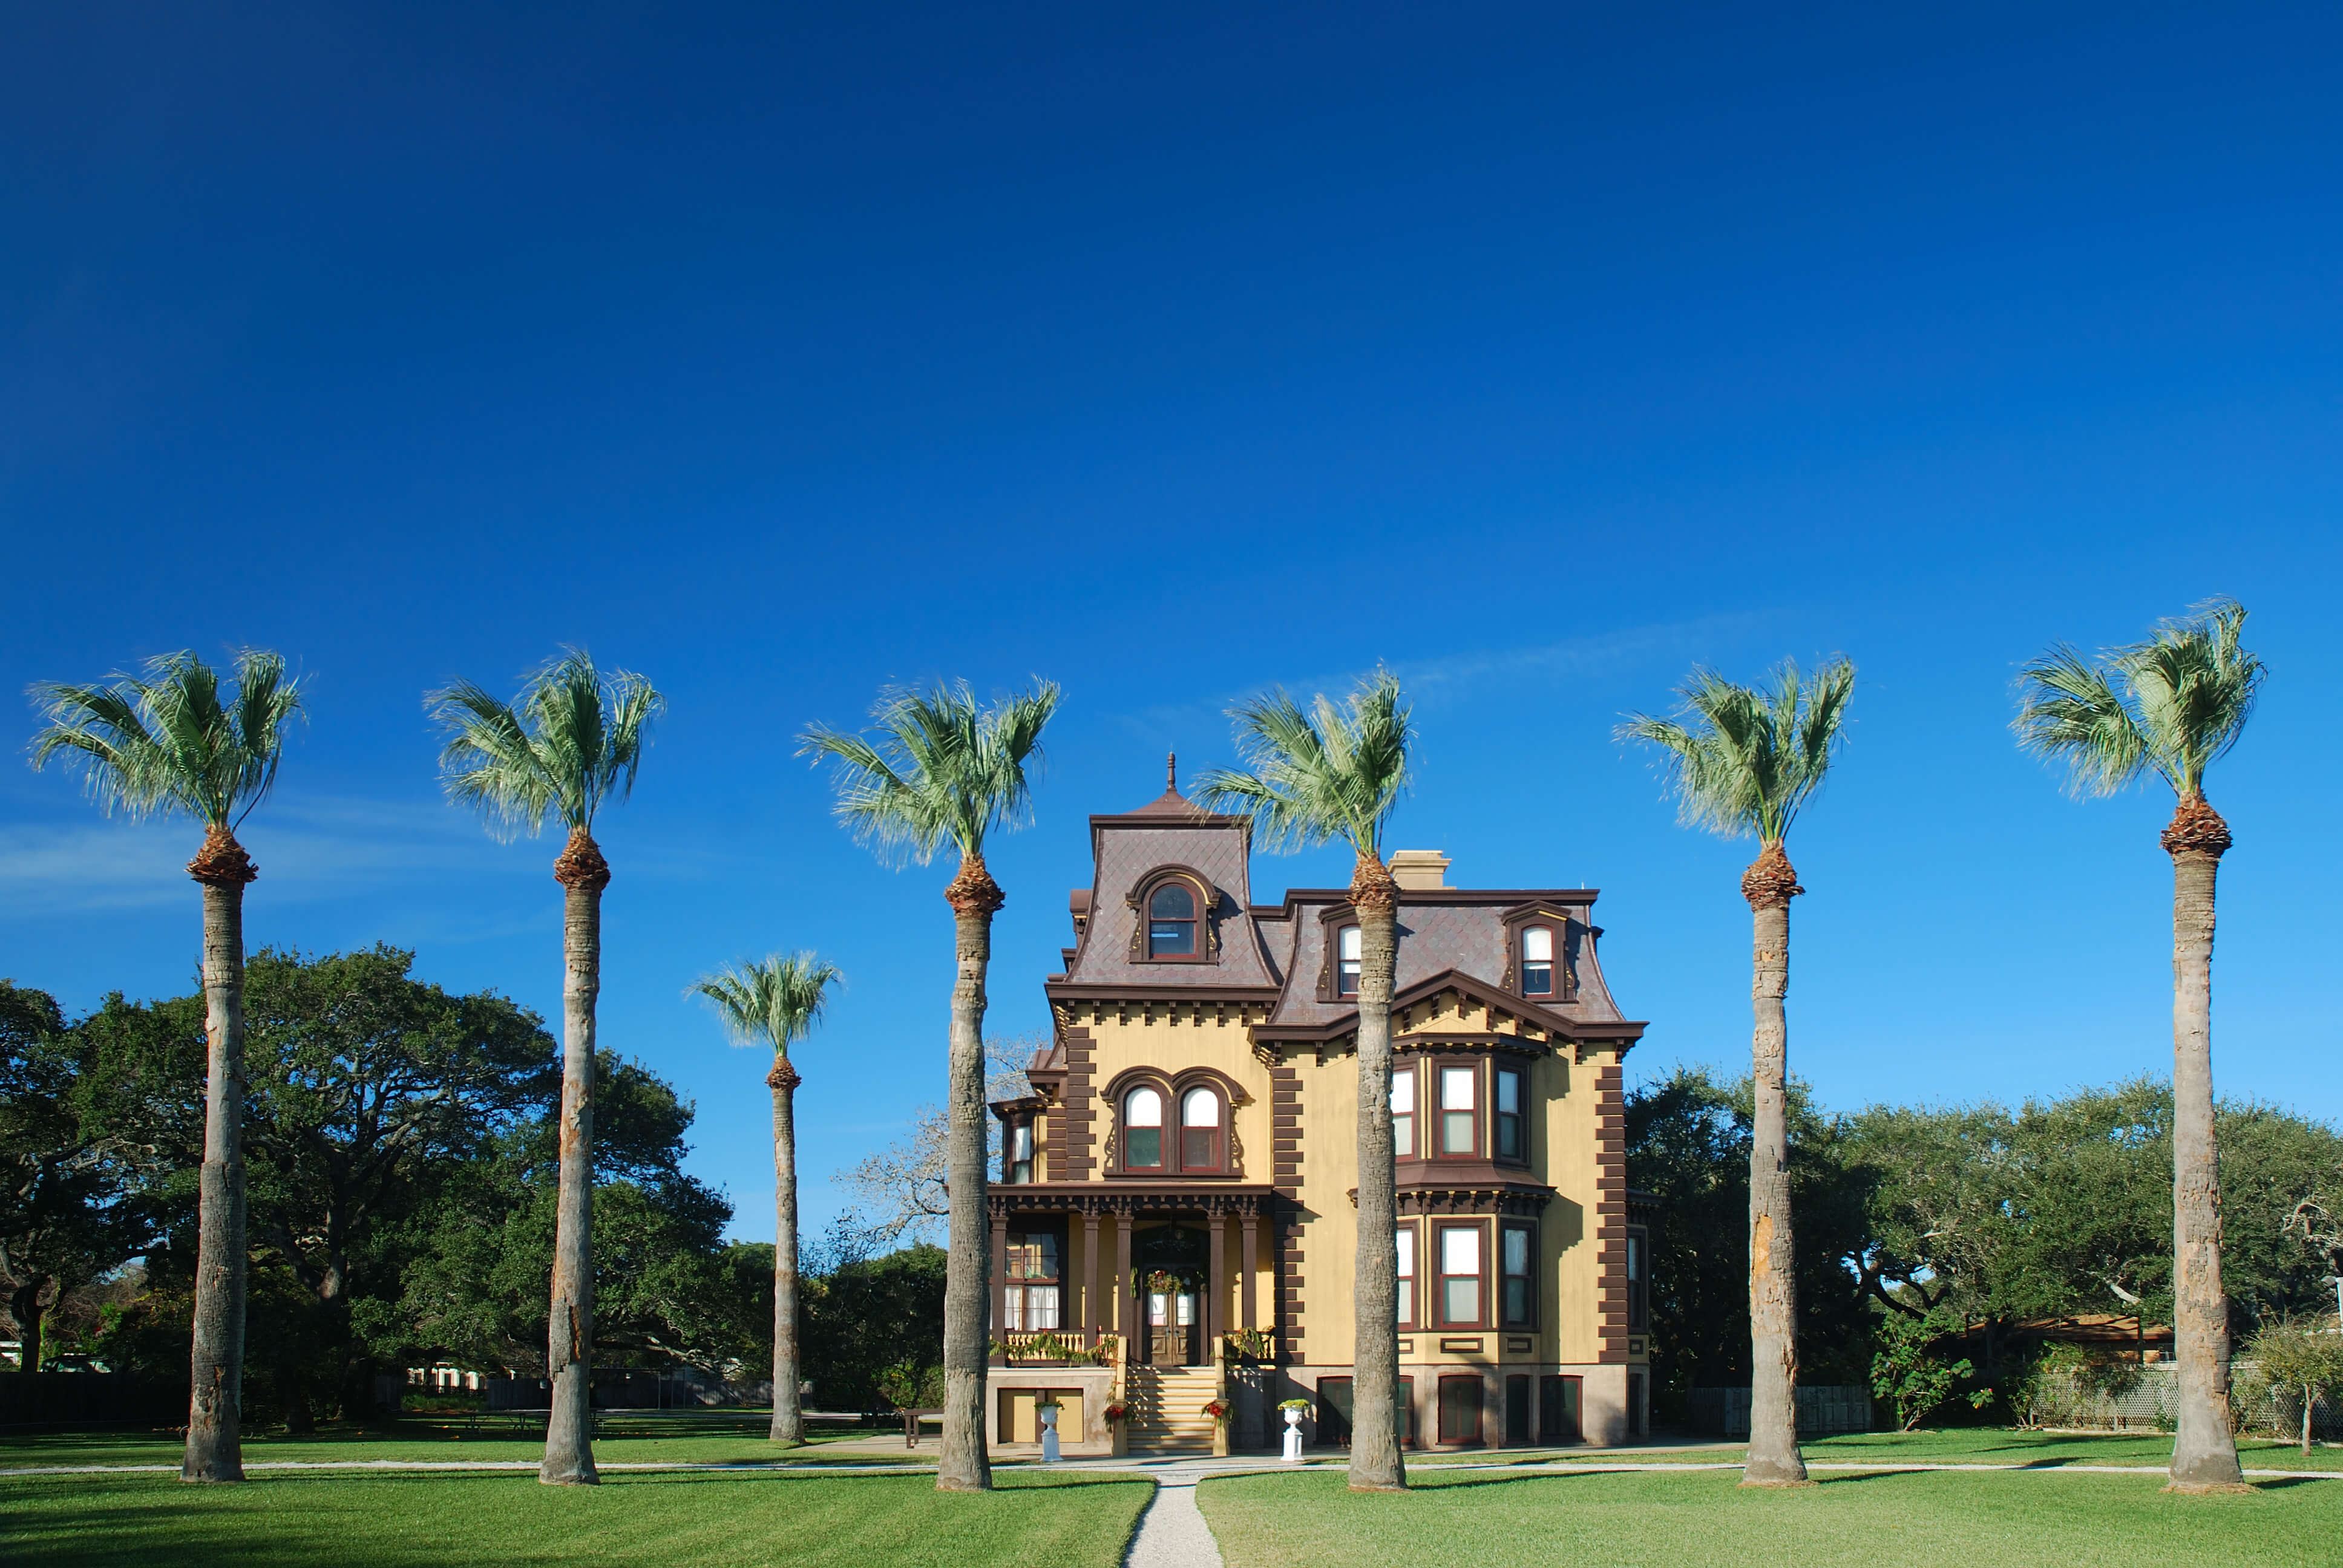 Exterior view of Fulton Mansion with palm trees